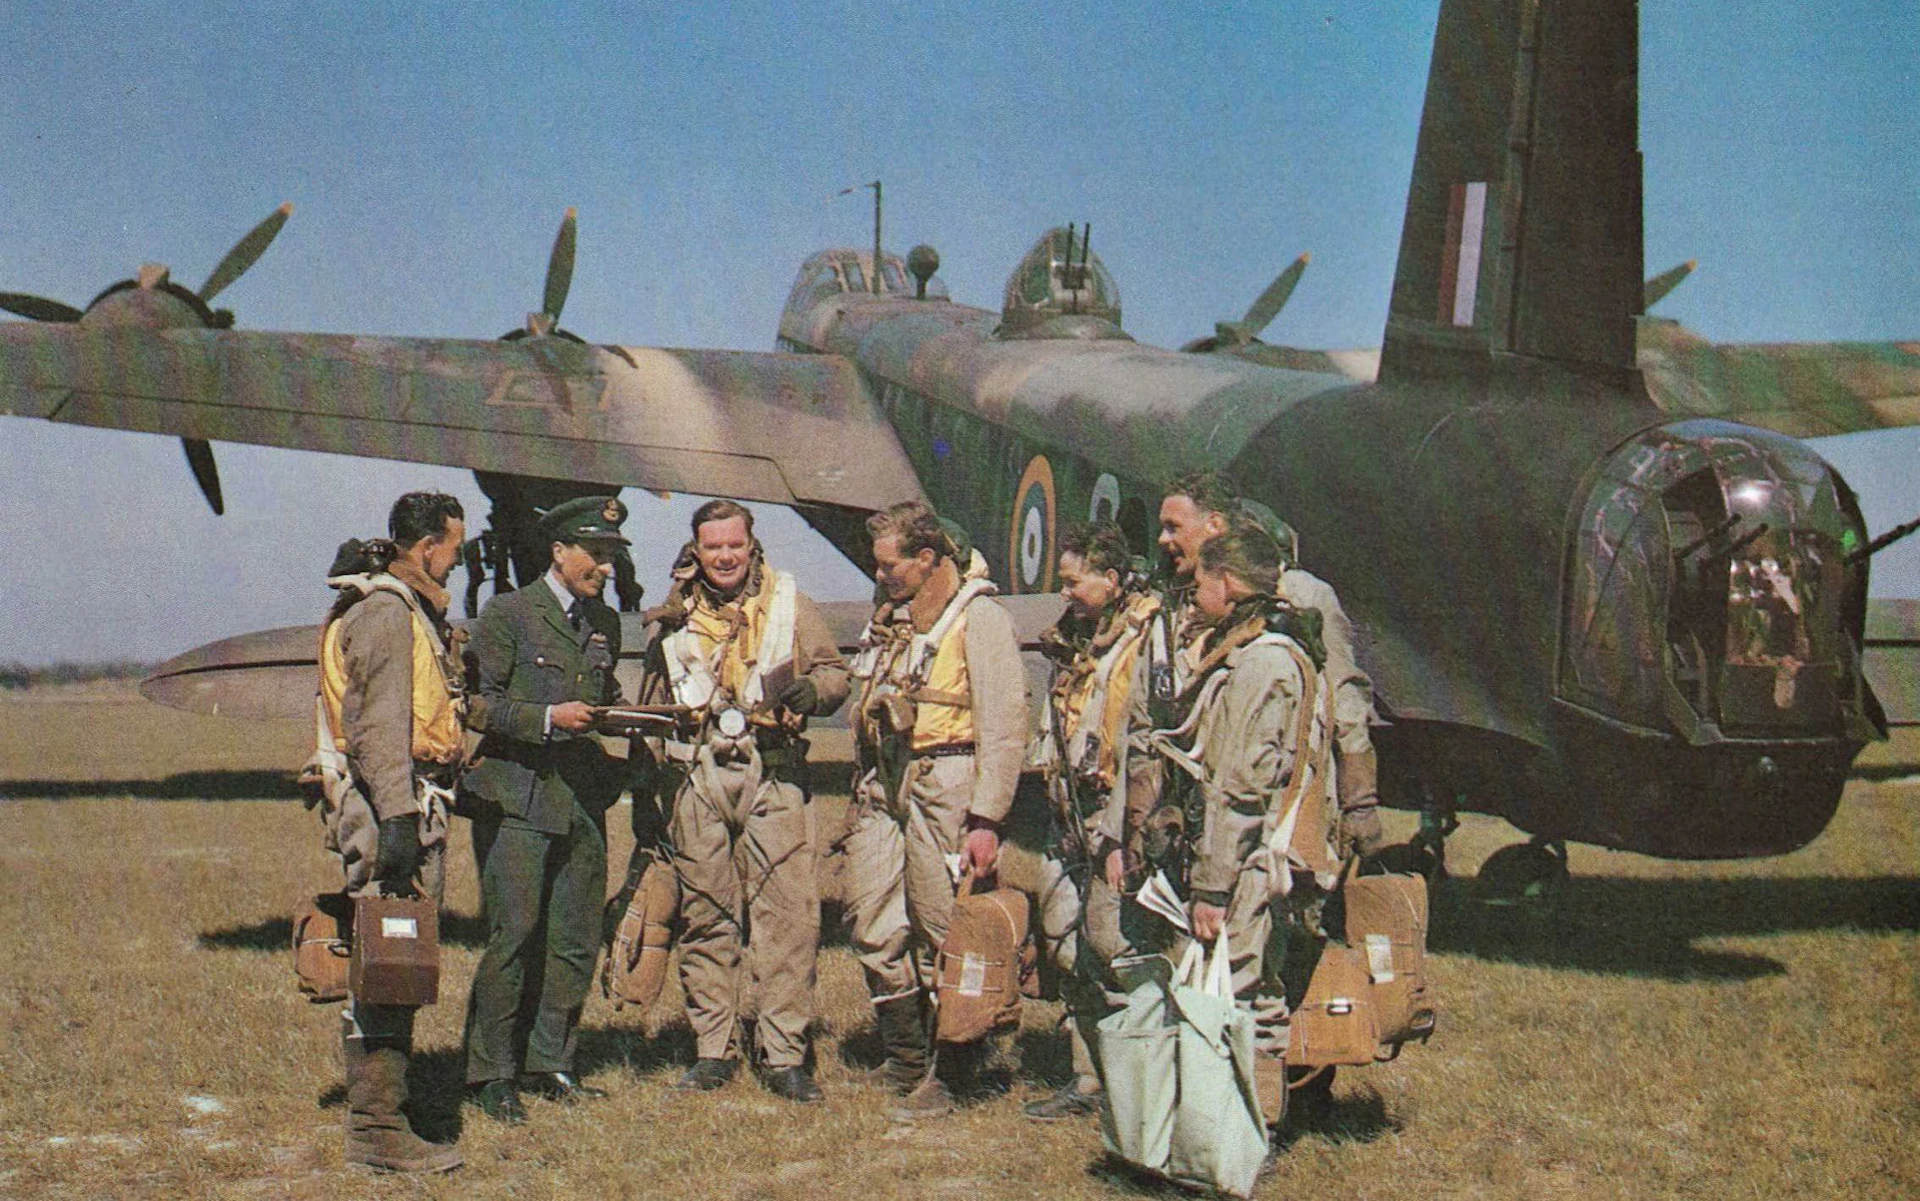 Captain Barr is third left. The RAF bomber crew being briefed in Cambridgeshire just weeks before their fateful mission in 1942. 